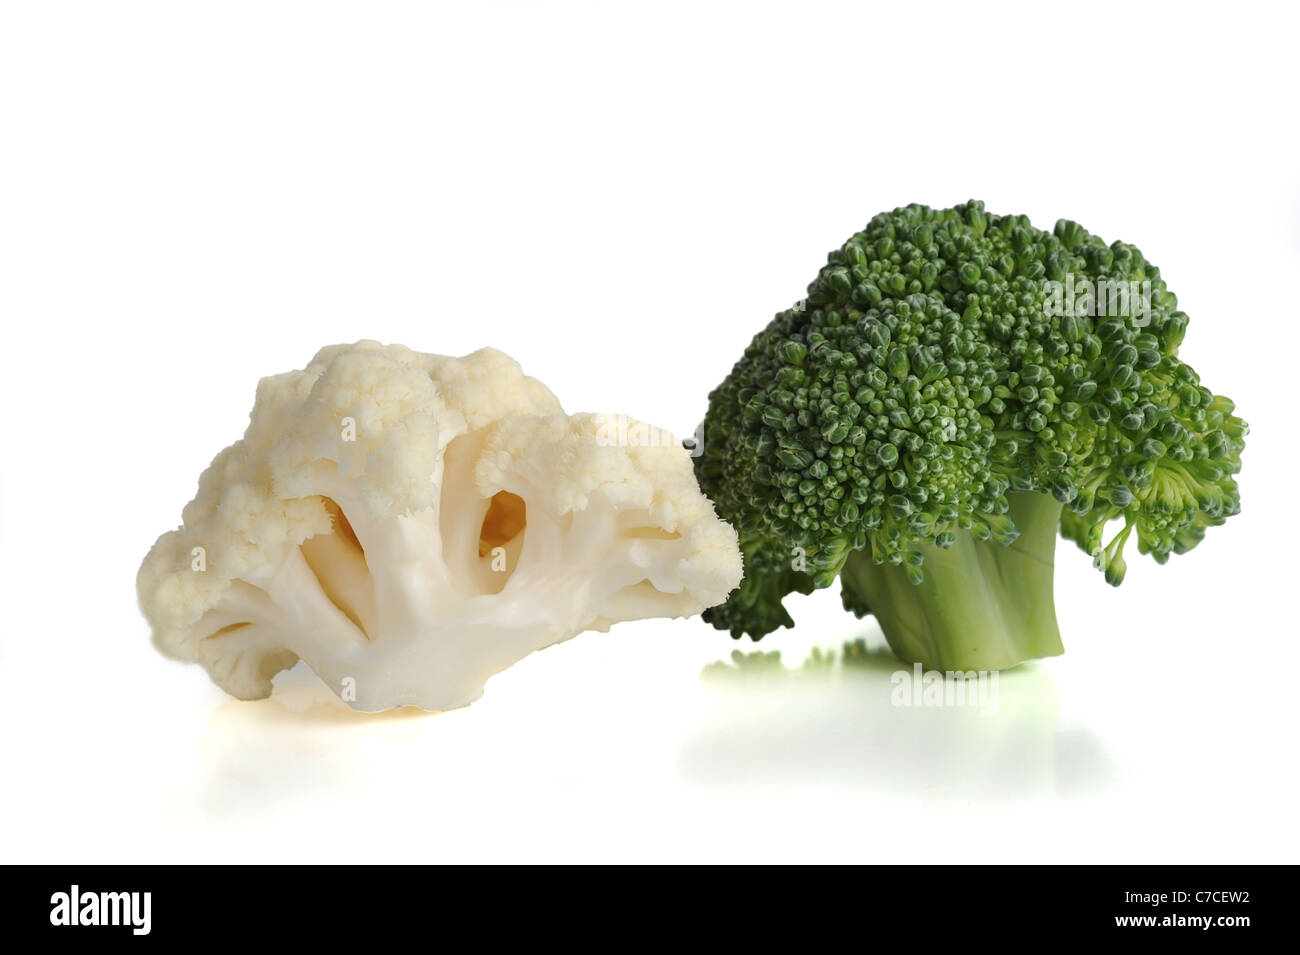 Extreme close-up image of a cauliflower and broccoli on white background Stock Photo